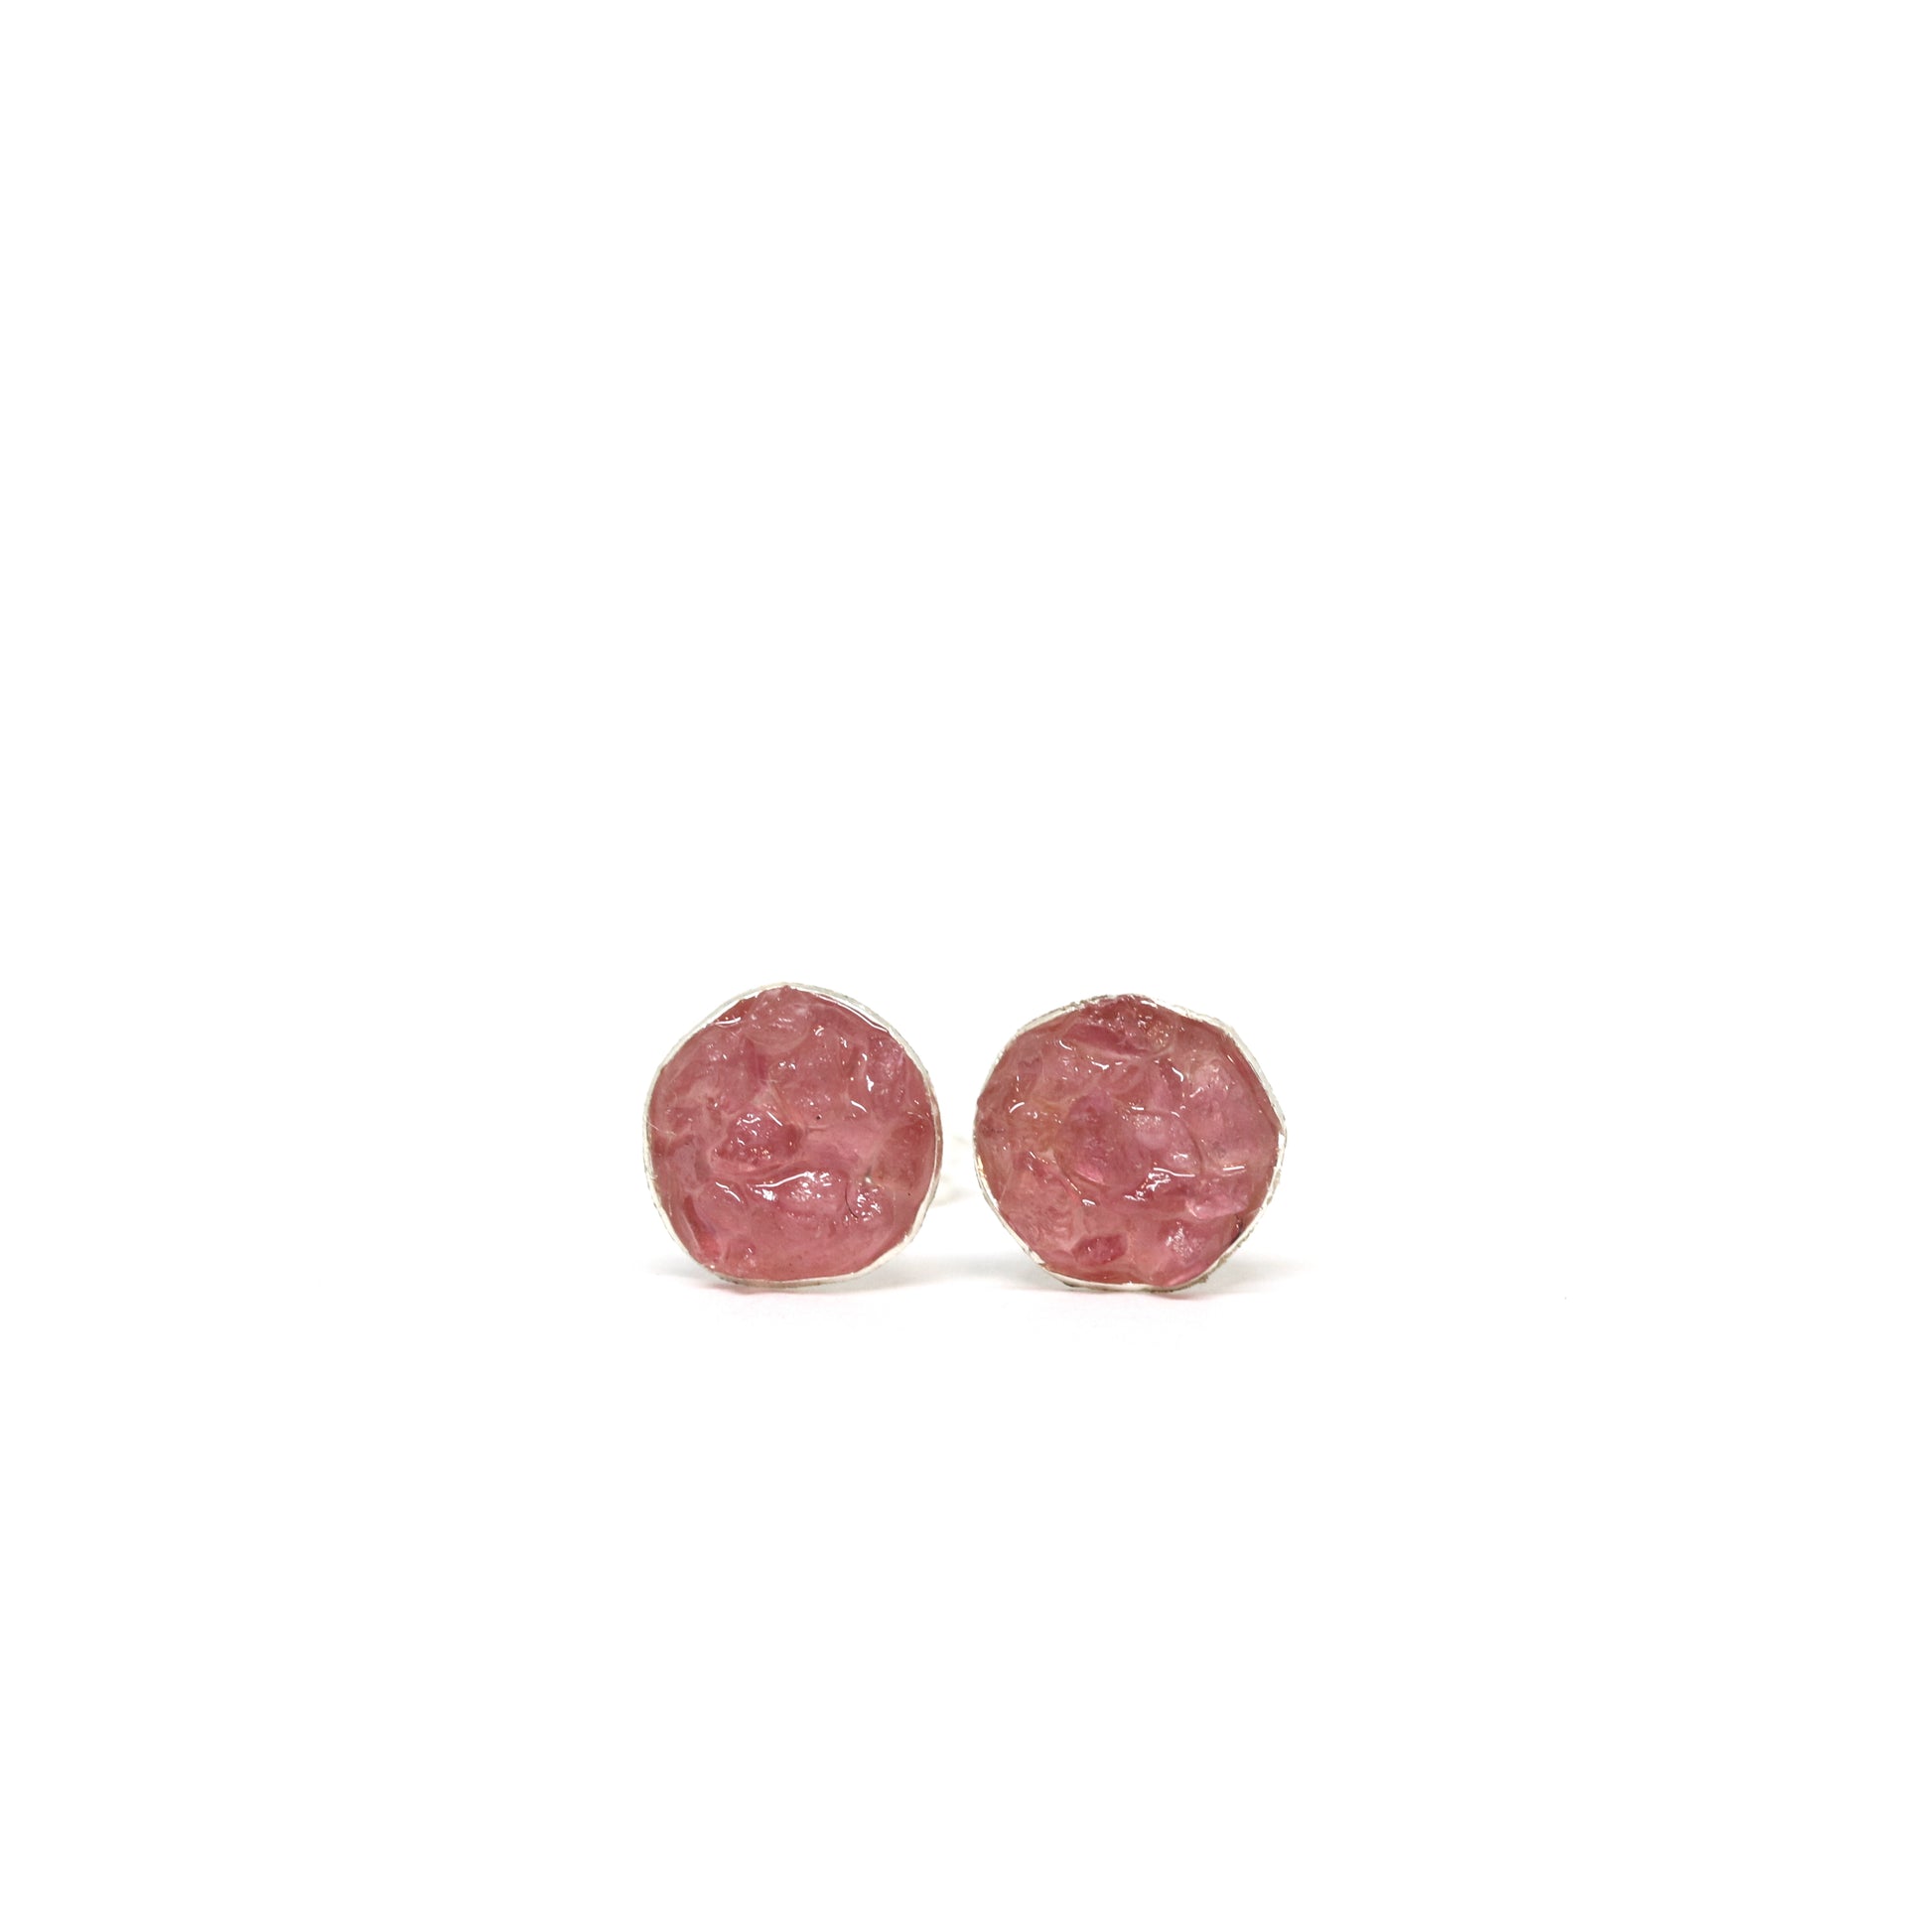 Pink Tourmaline. Gemstone and silver stud earrings. Made in Wanaka. Unique, colourful jewellery designed and crafted by New Zealand artist and jeweller Briar Hardy-Hesson.